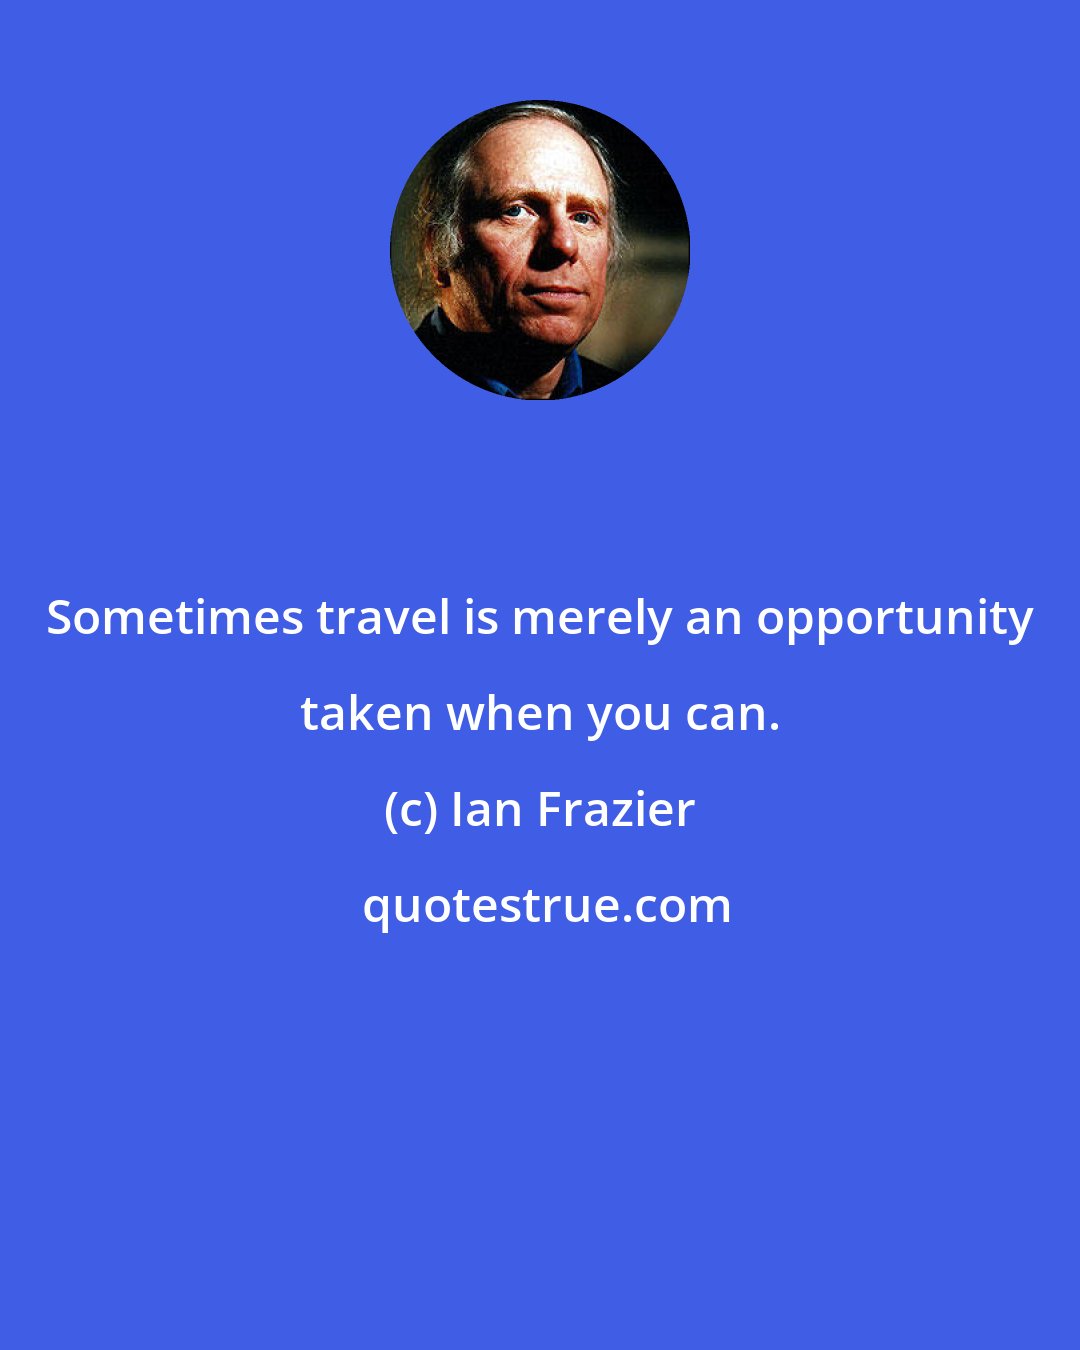 Ian Frazier: Sometimes travel is merely an opportunity taken when you can.